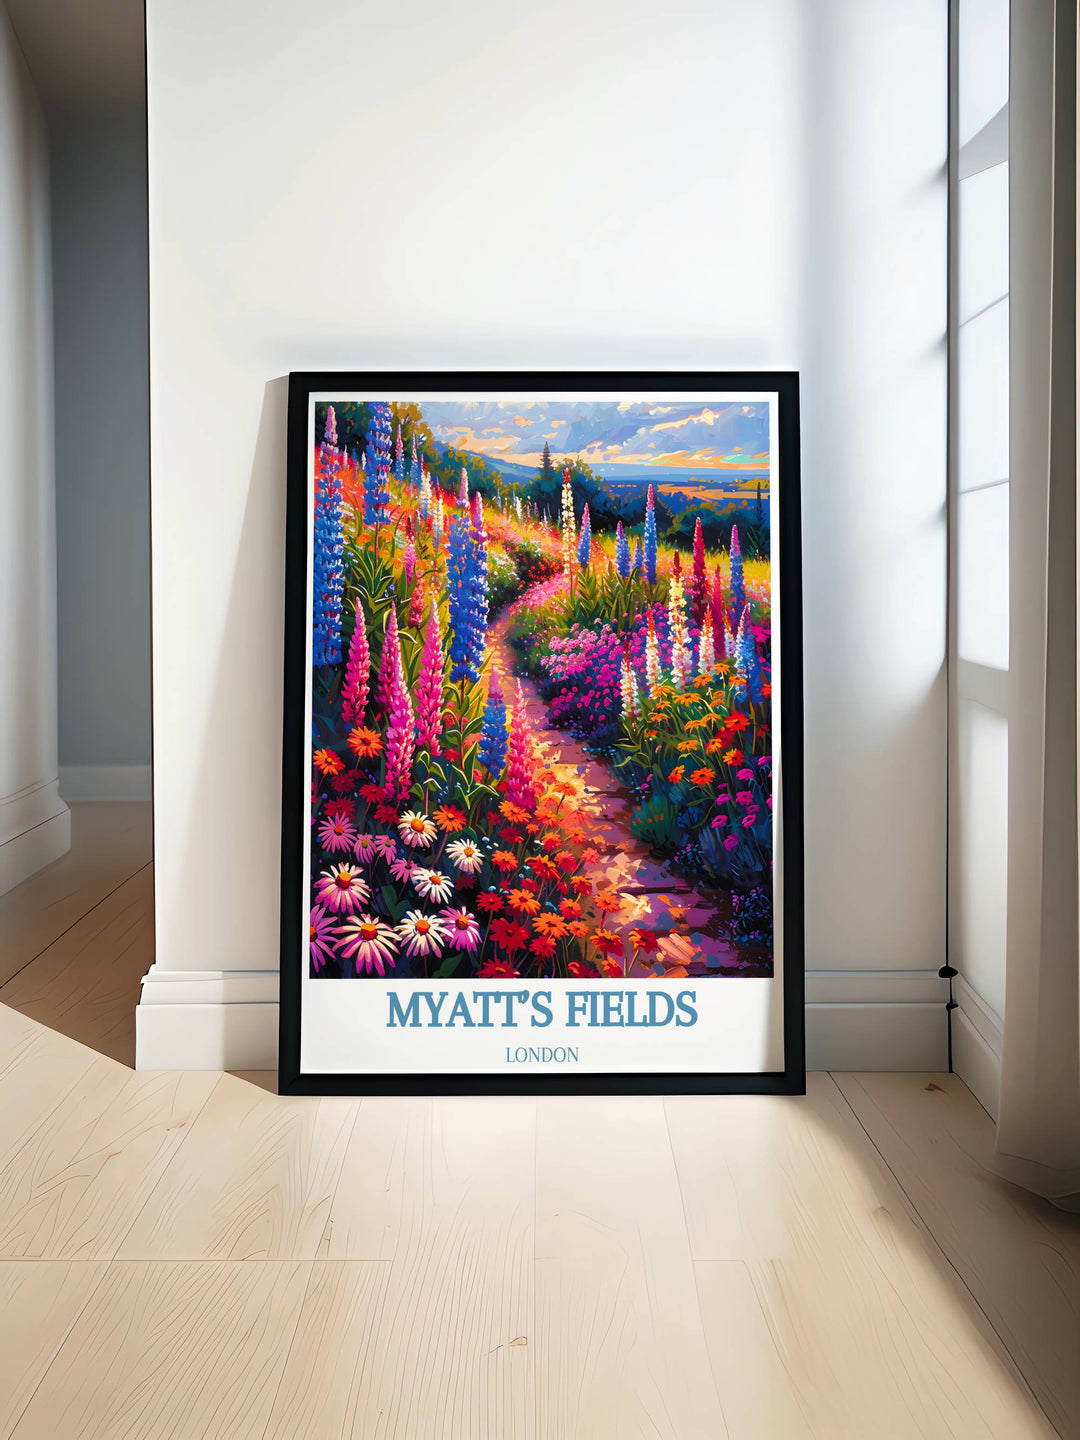 Gallery wall art of Myatts Field featuring lush greenery and colorful flower beds, perfect for enhancing any living space with natural beauty.